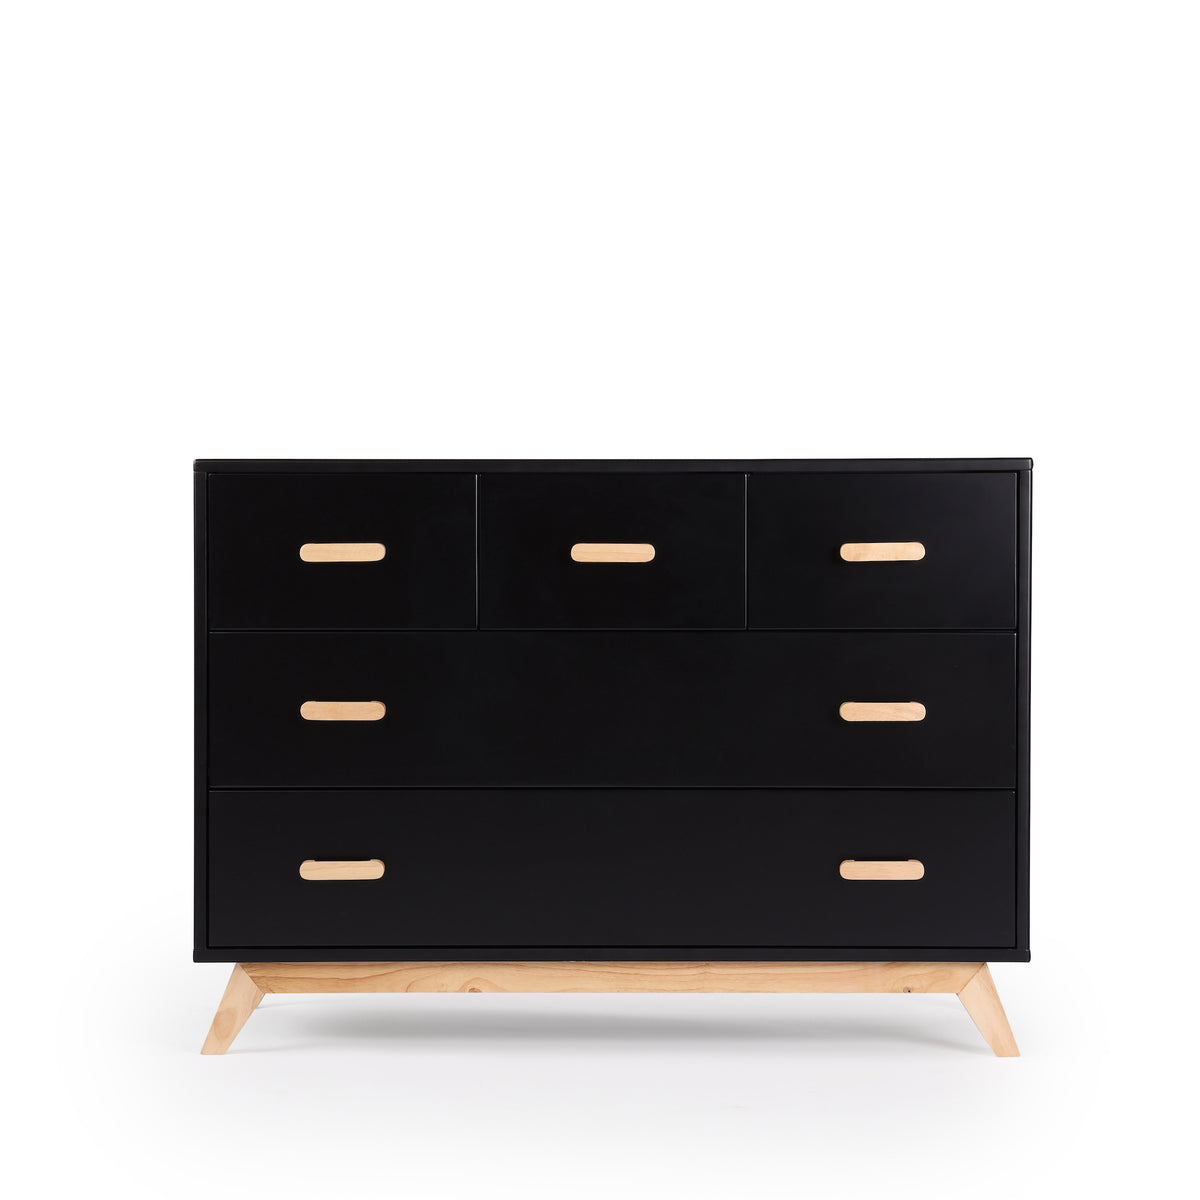 Soho 5-Drawer Dresser - Black with Natural – Project Nursery